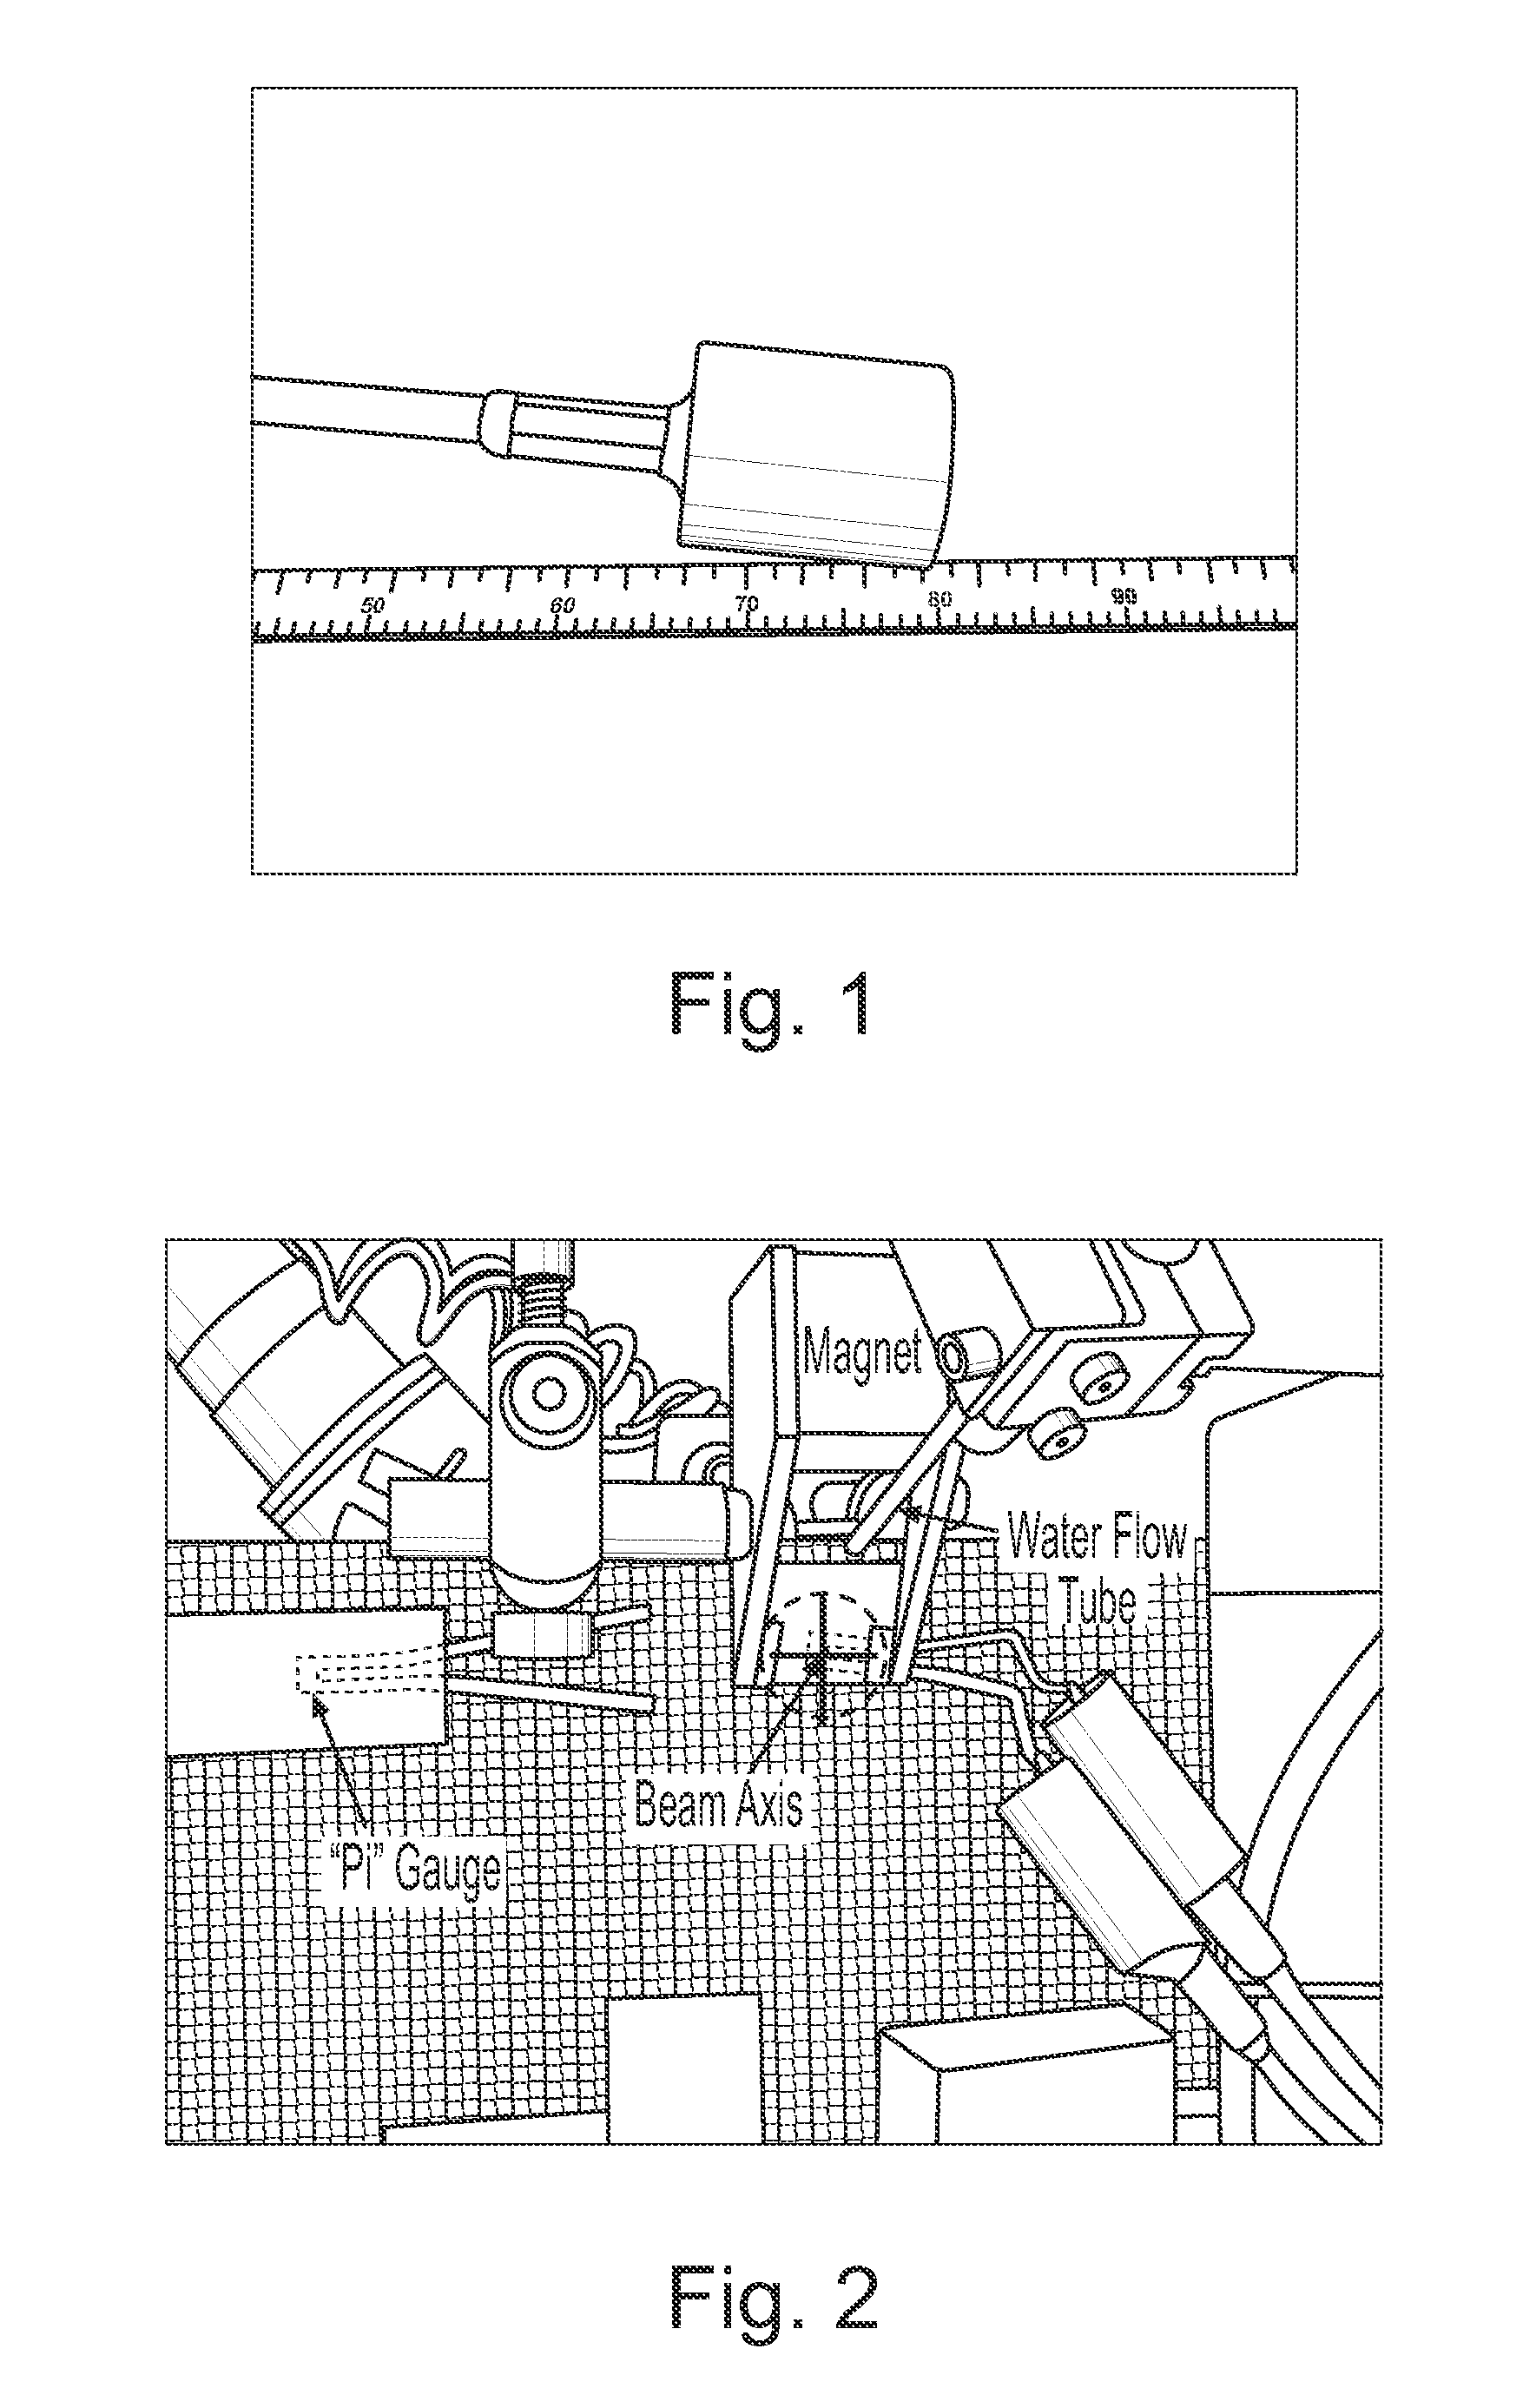 Apparatus and method for non-destructive testing